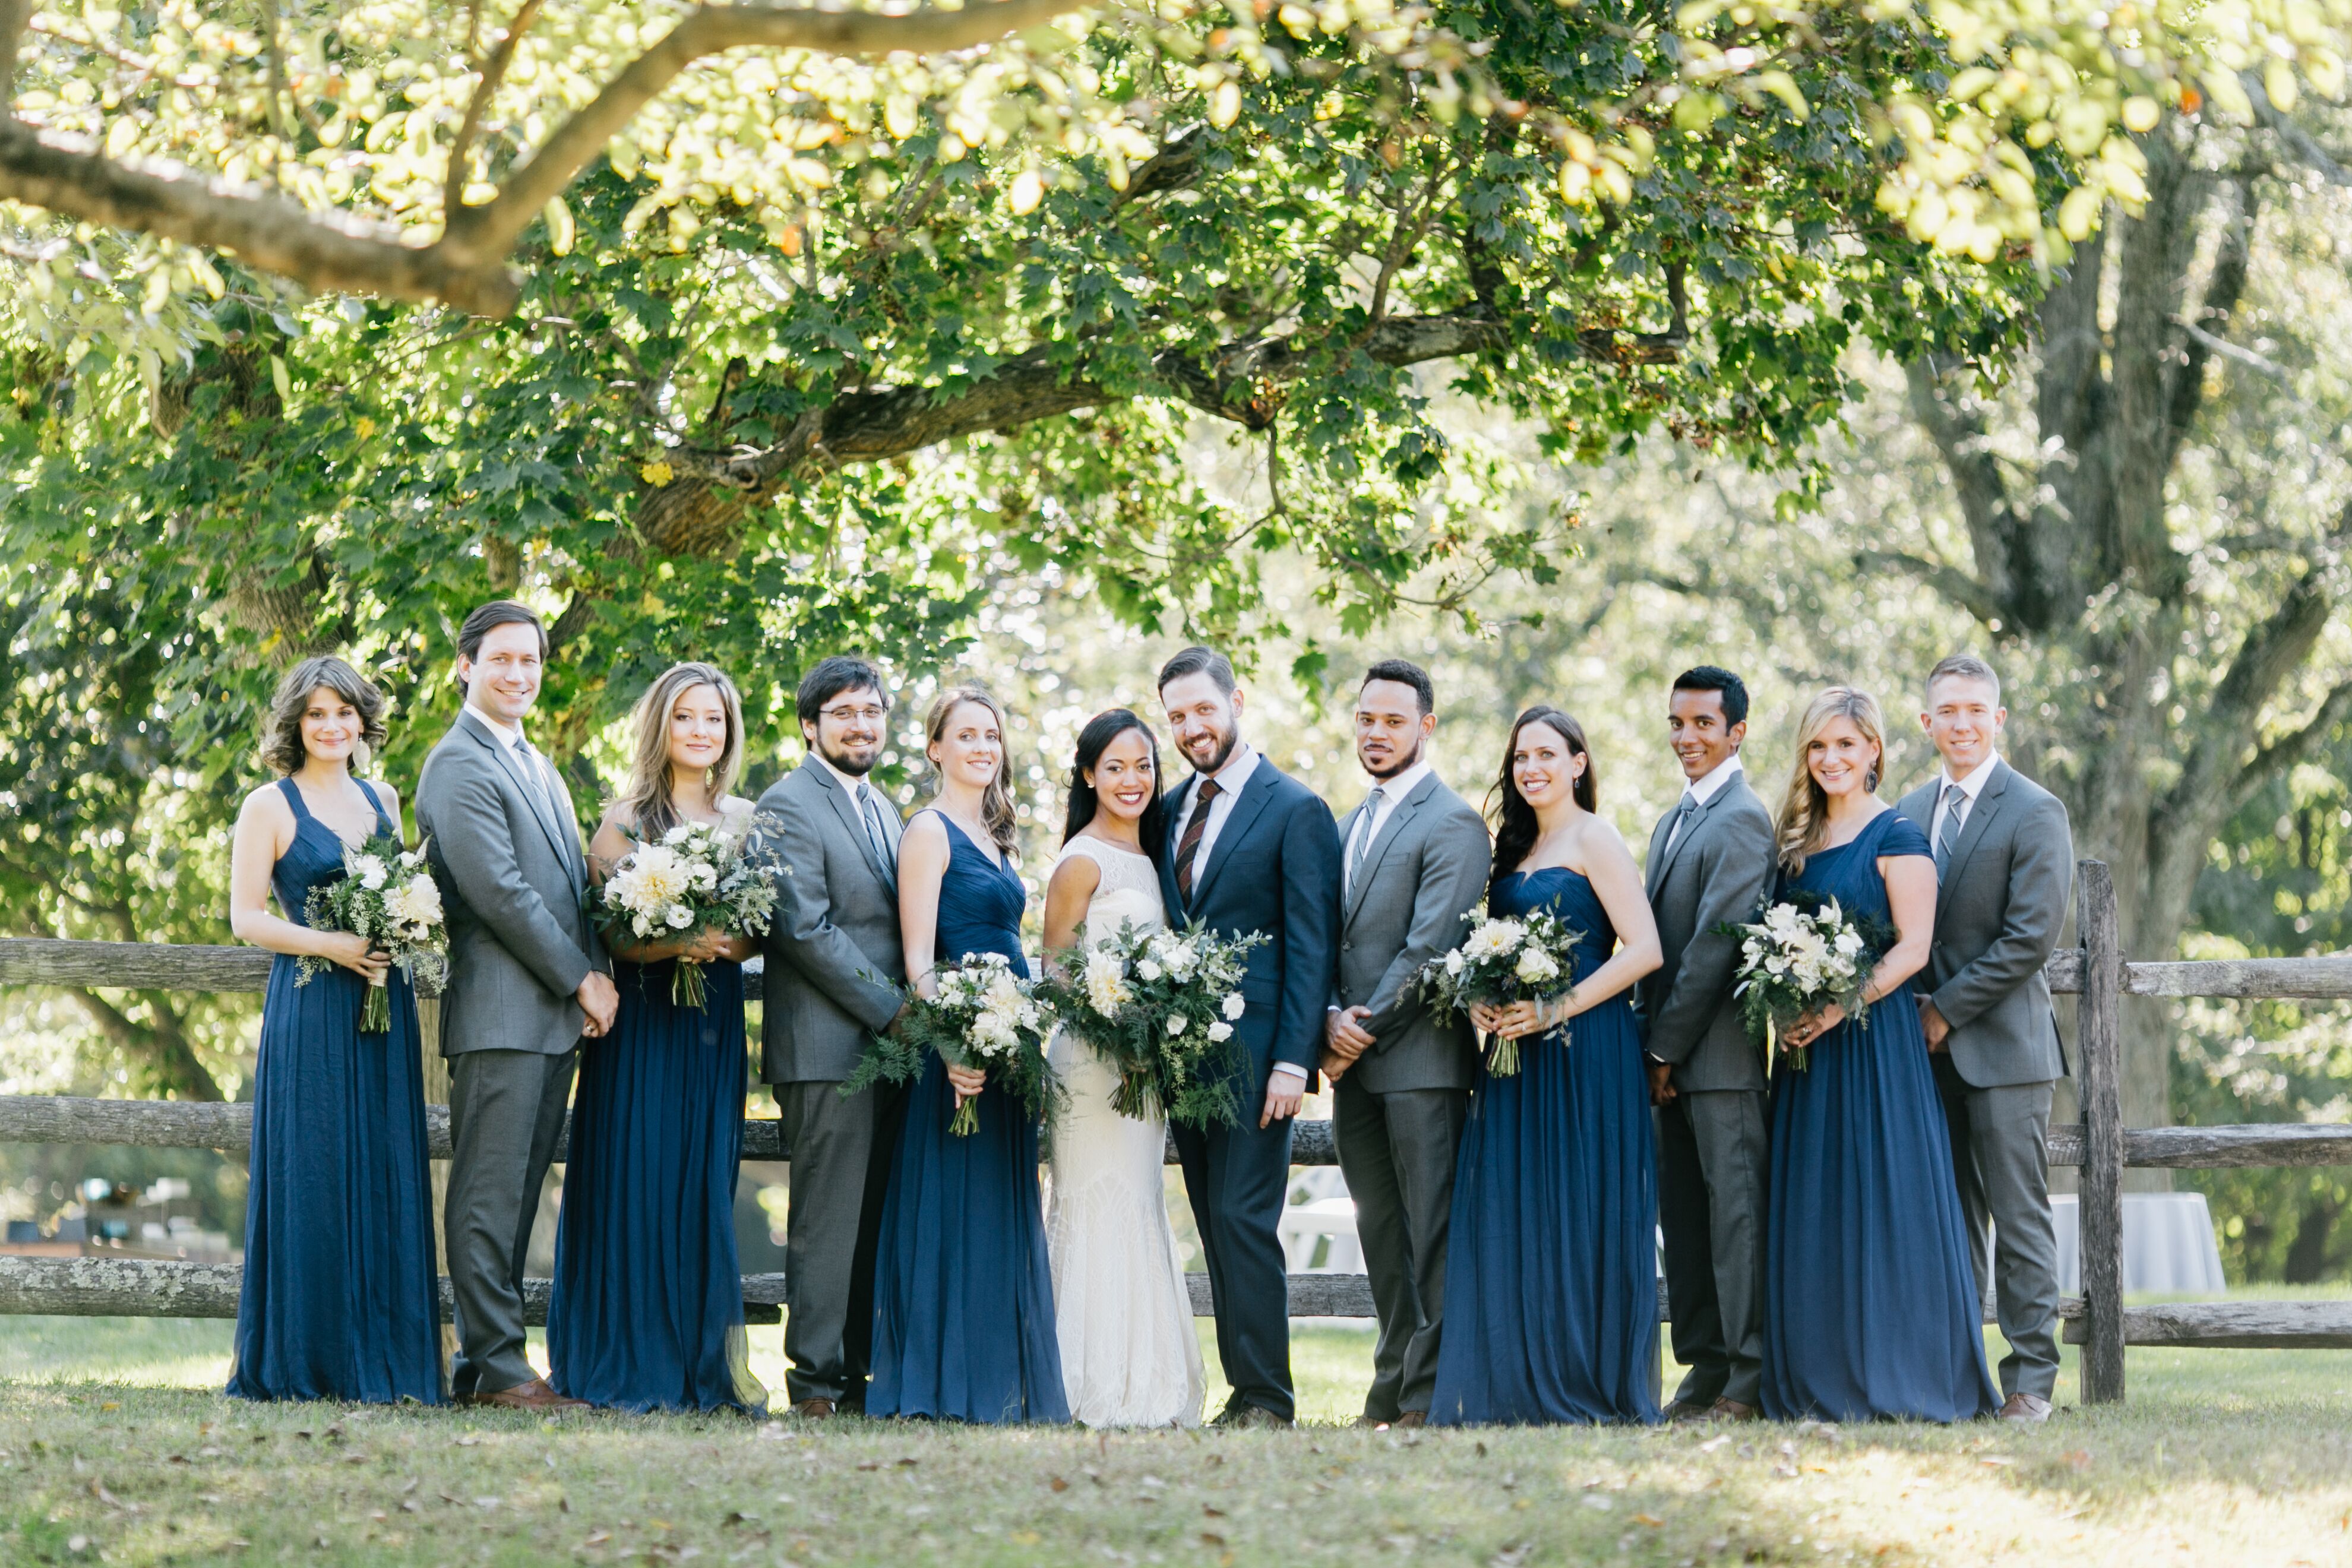 Navy Bridesmaid Dresses and Gray Groomsmen Suits